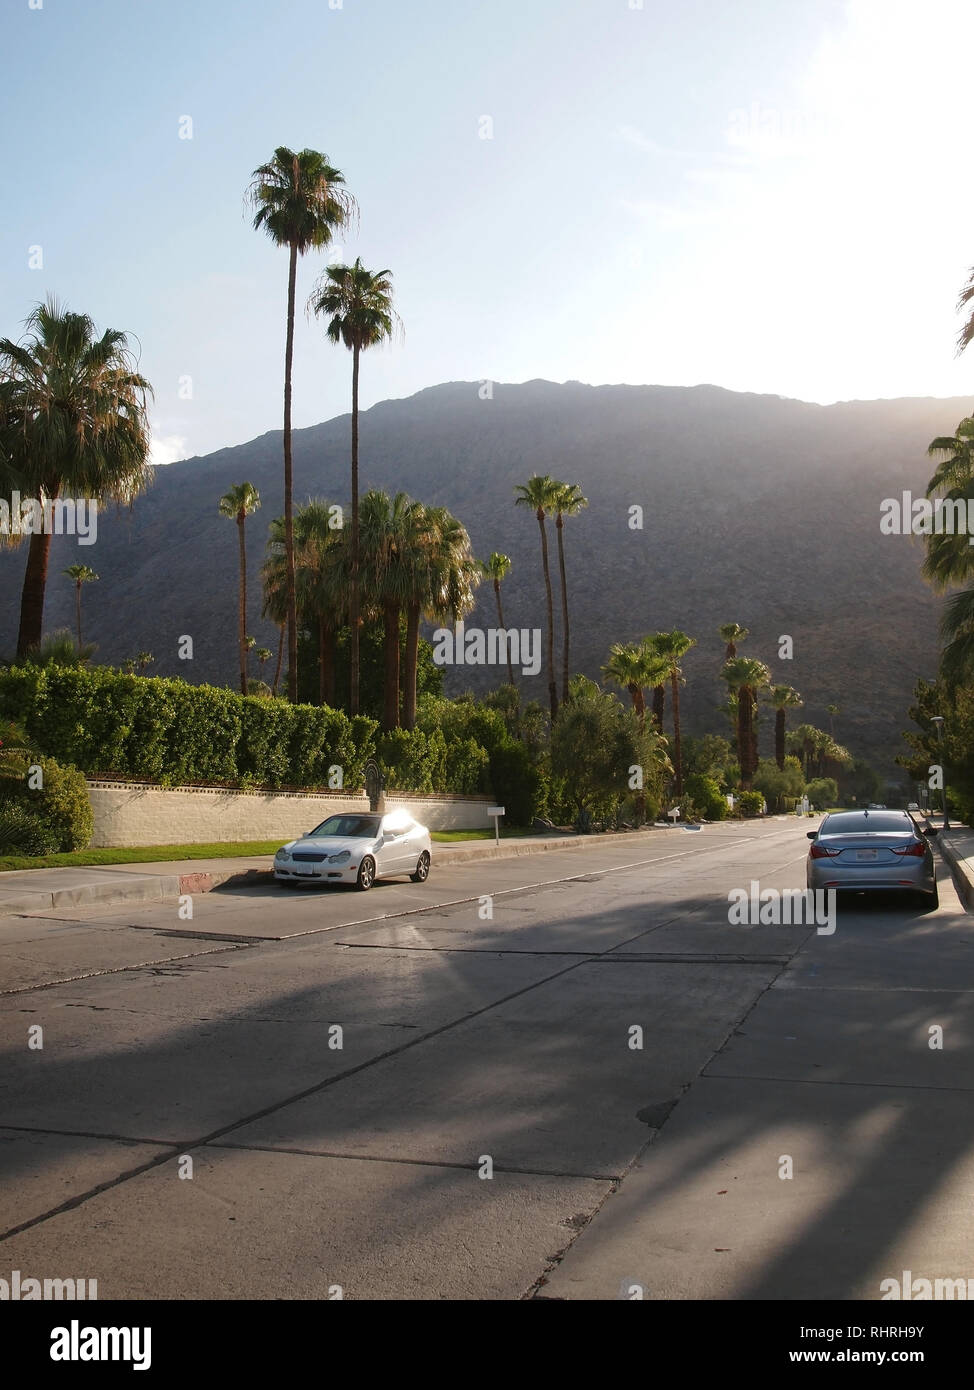 A palm tree lined street through a residential neighborhood in Palm Springs, California in the late afternoon close to sunset with mountains in the ba Stock Photo